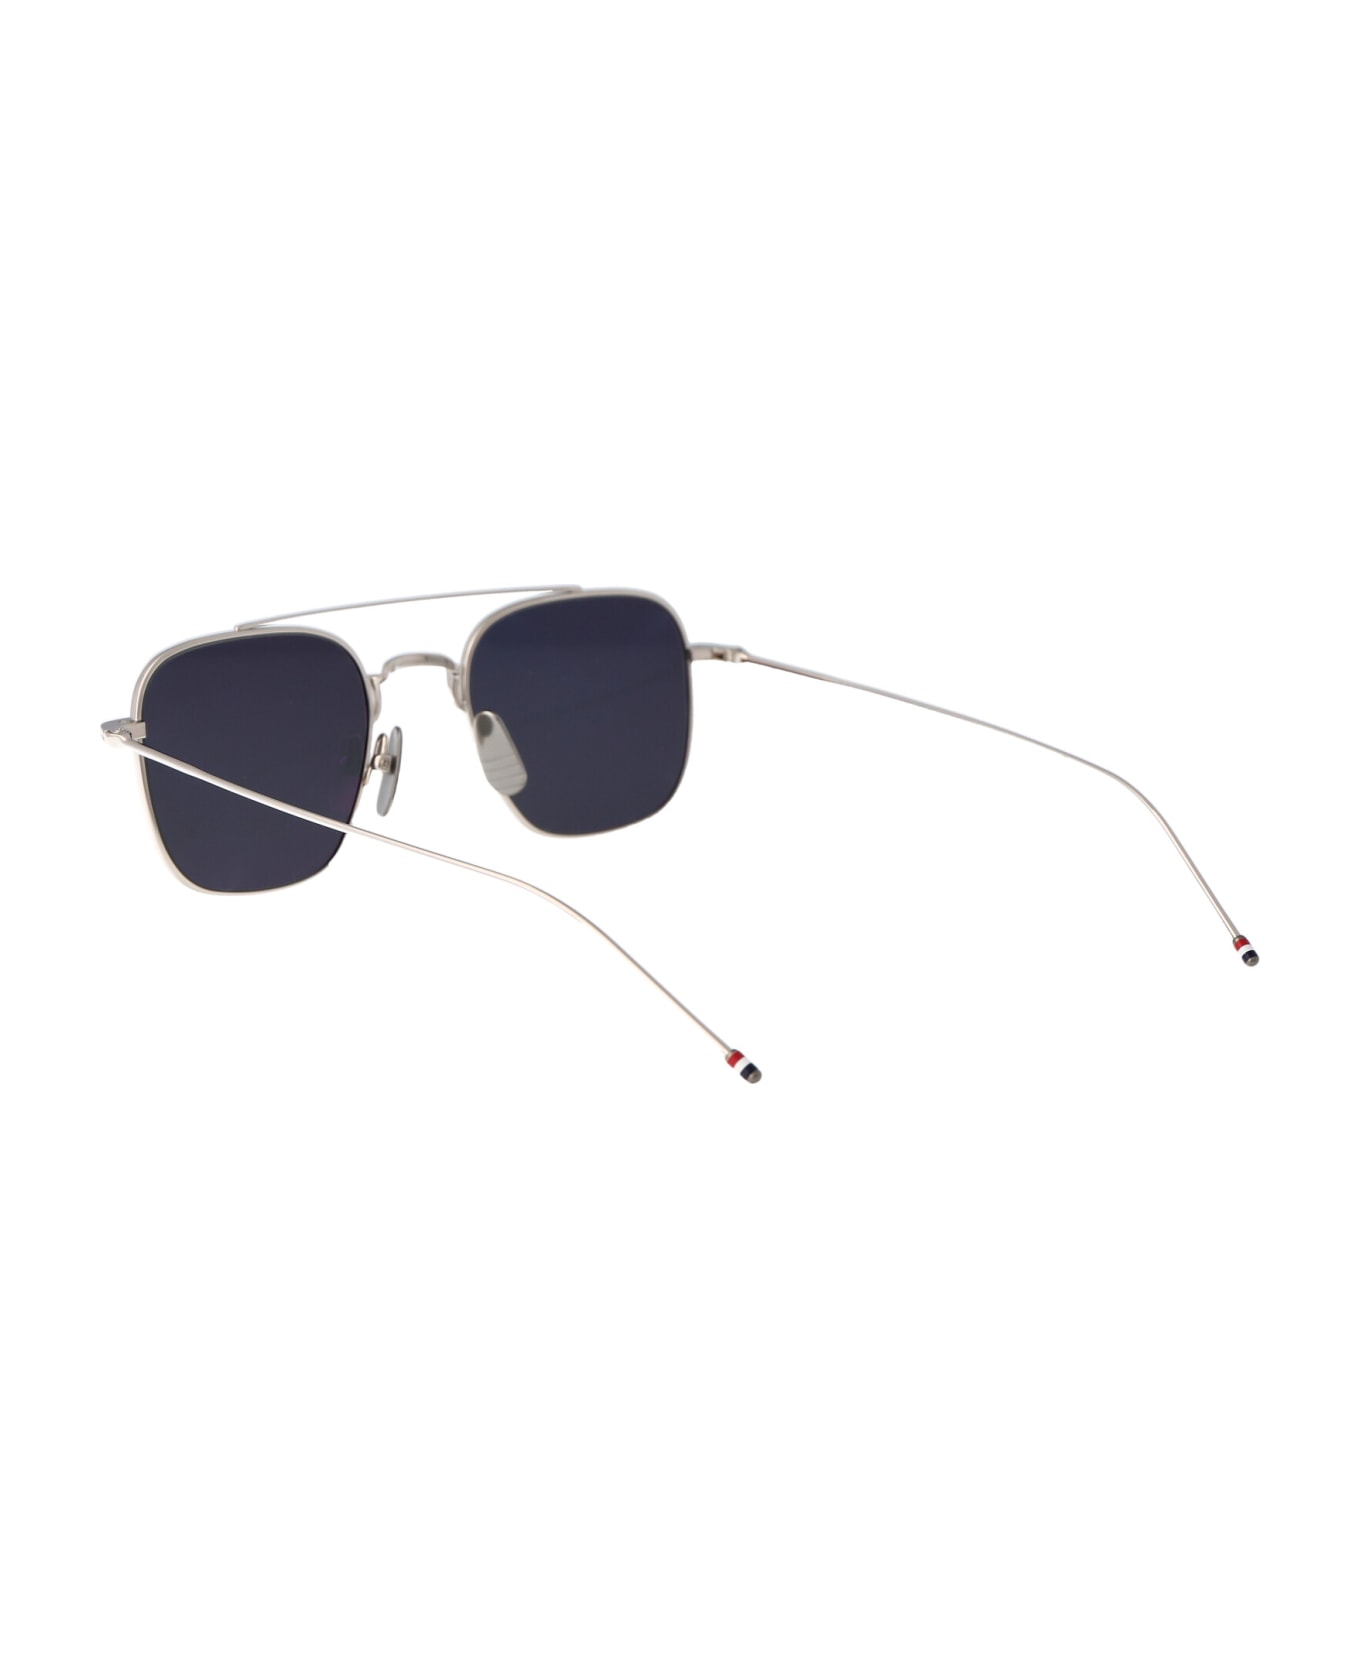 Thom Browne Ues907a-g0001-045-50 Sunglasses - 045 SILVER サングラス